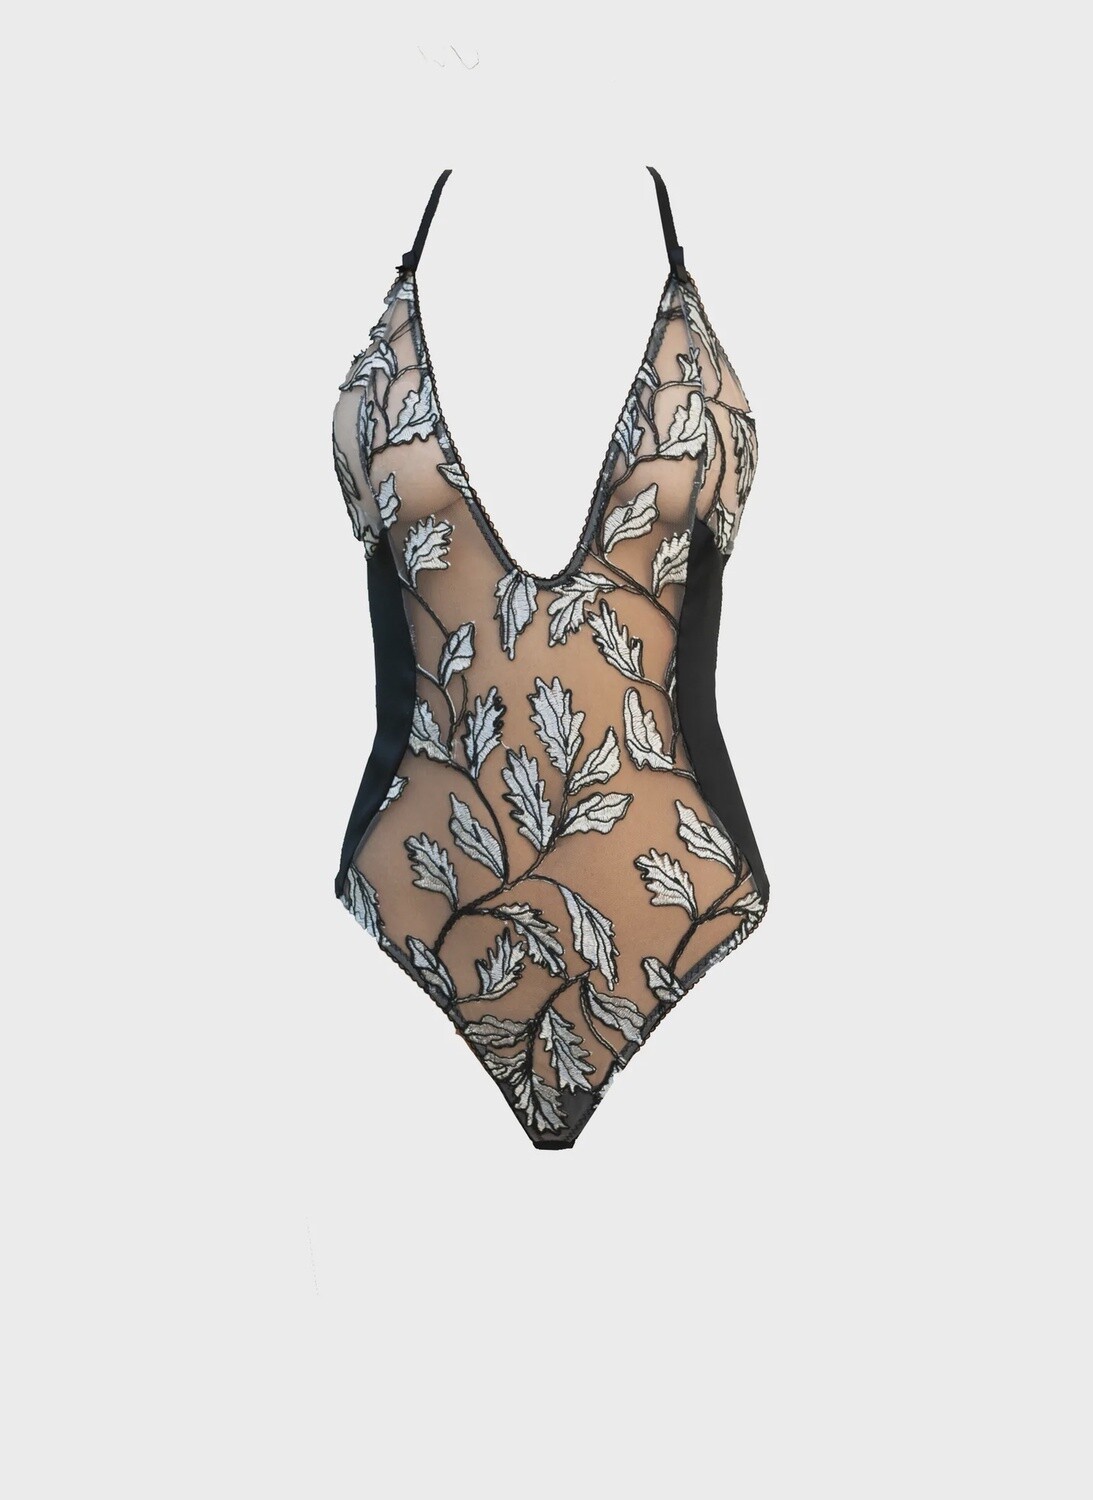 Angkor Wat Heavy Satin and Embroidered Tulle Bodysuit, Size: XS